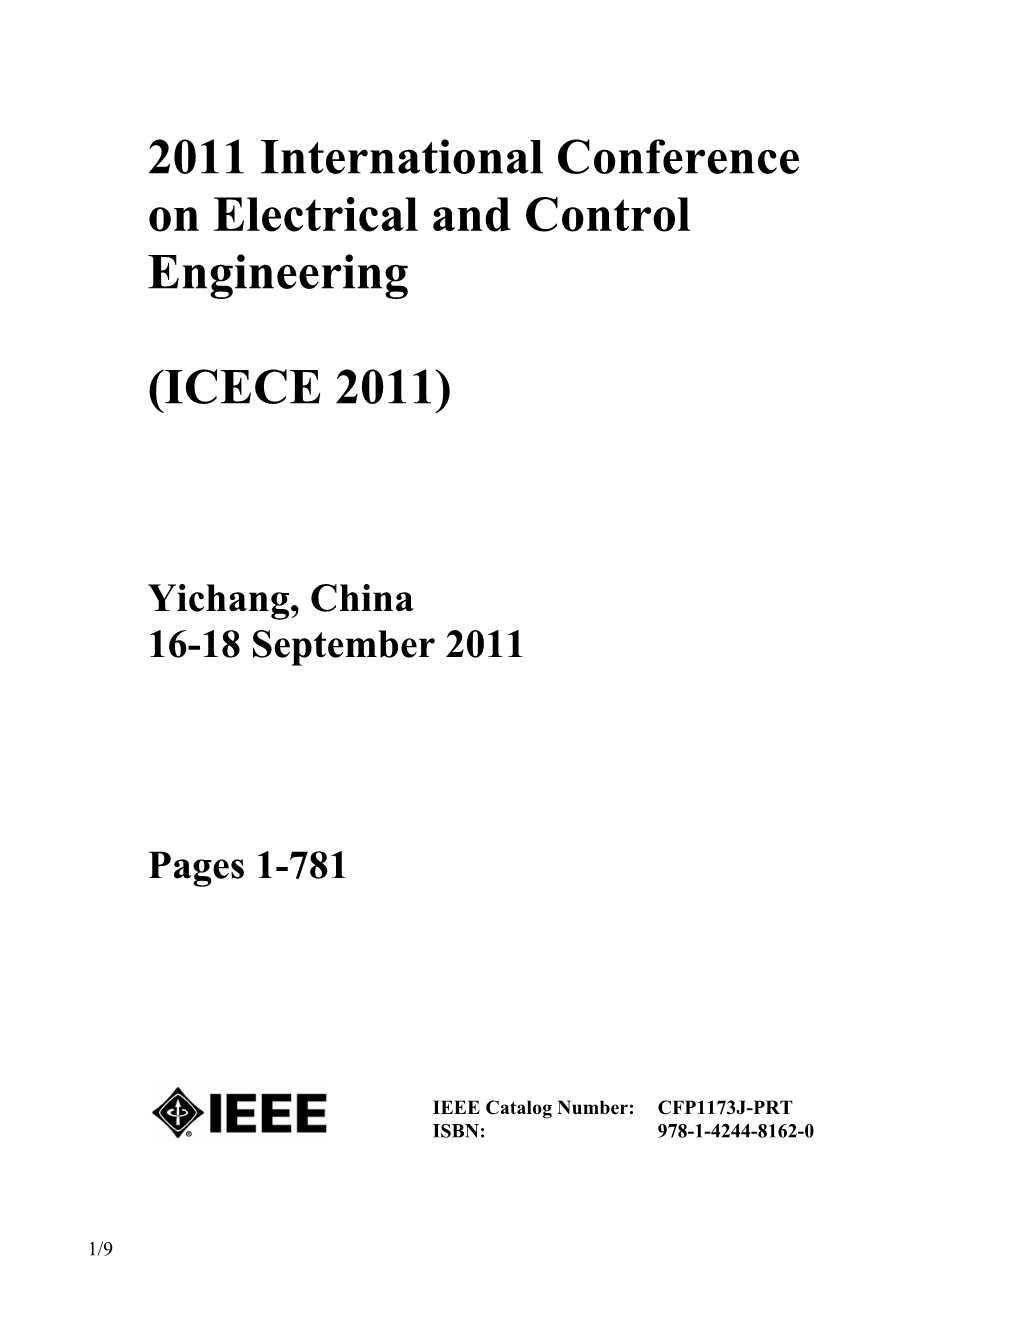 2011 International Conference on Electrical and Control Engineering